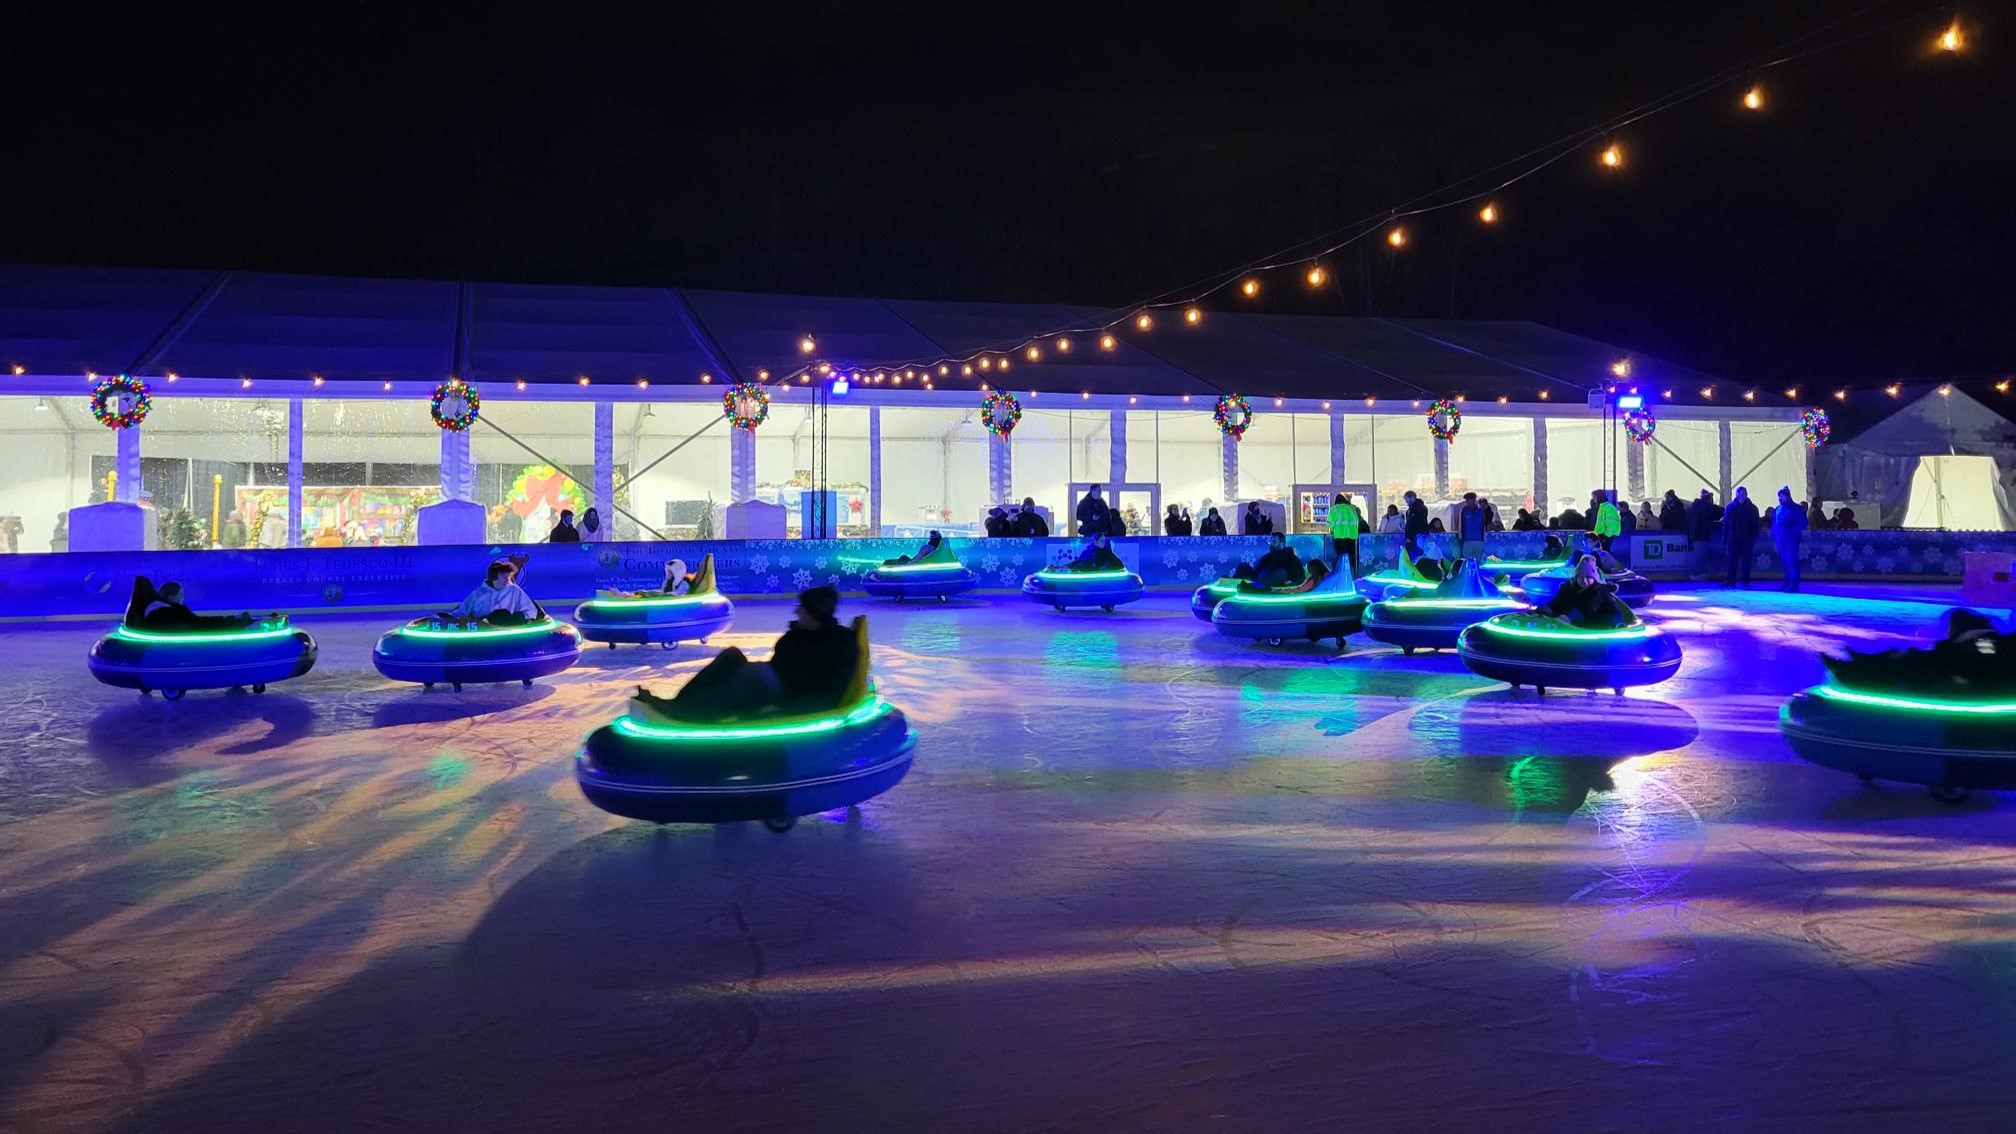 BERGEN COUNTY’S WINTER WONDERLAND NEW ICE BUMPER CAR ATTRACTION, BEGINS DAILY OPERATION